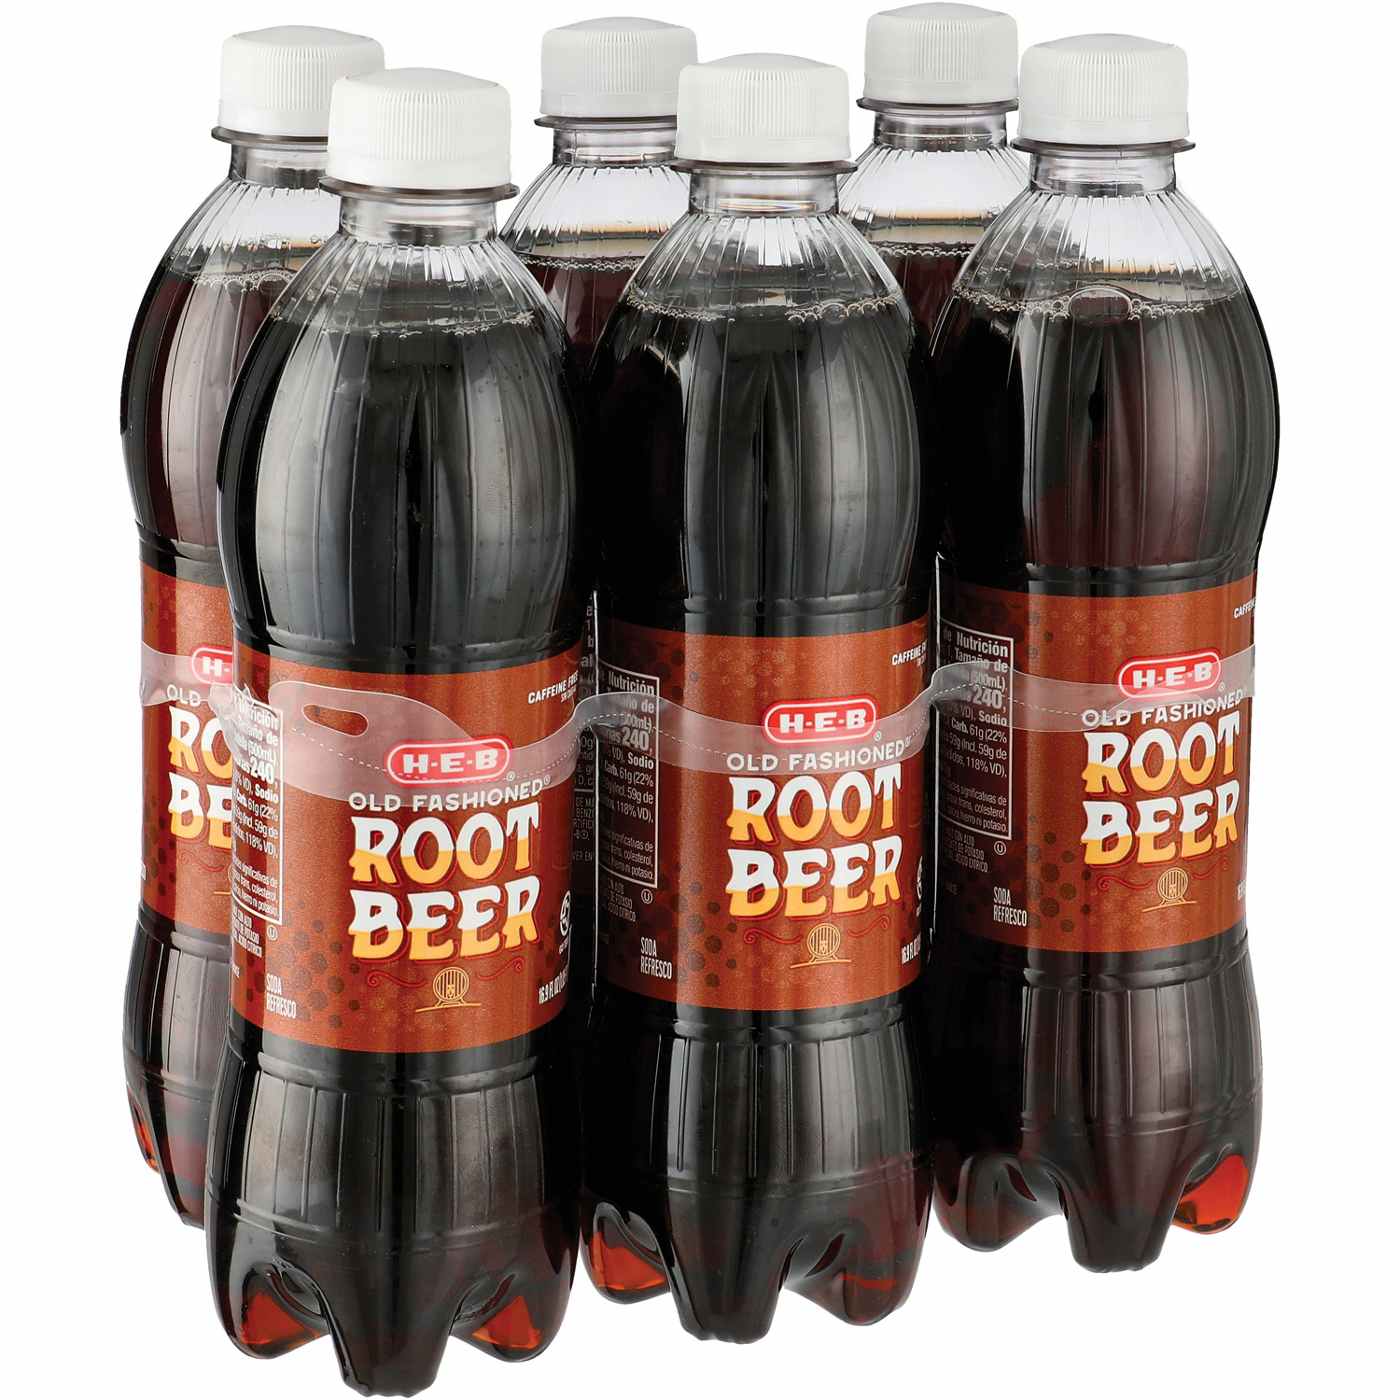 H-E-B Old Fashioned Root Beer Soda 6 pk Bottles; image 2 of 2